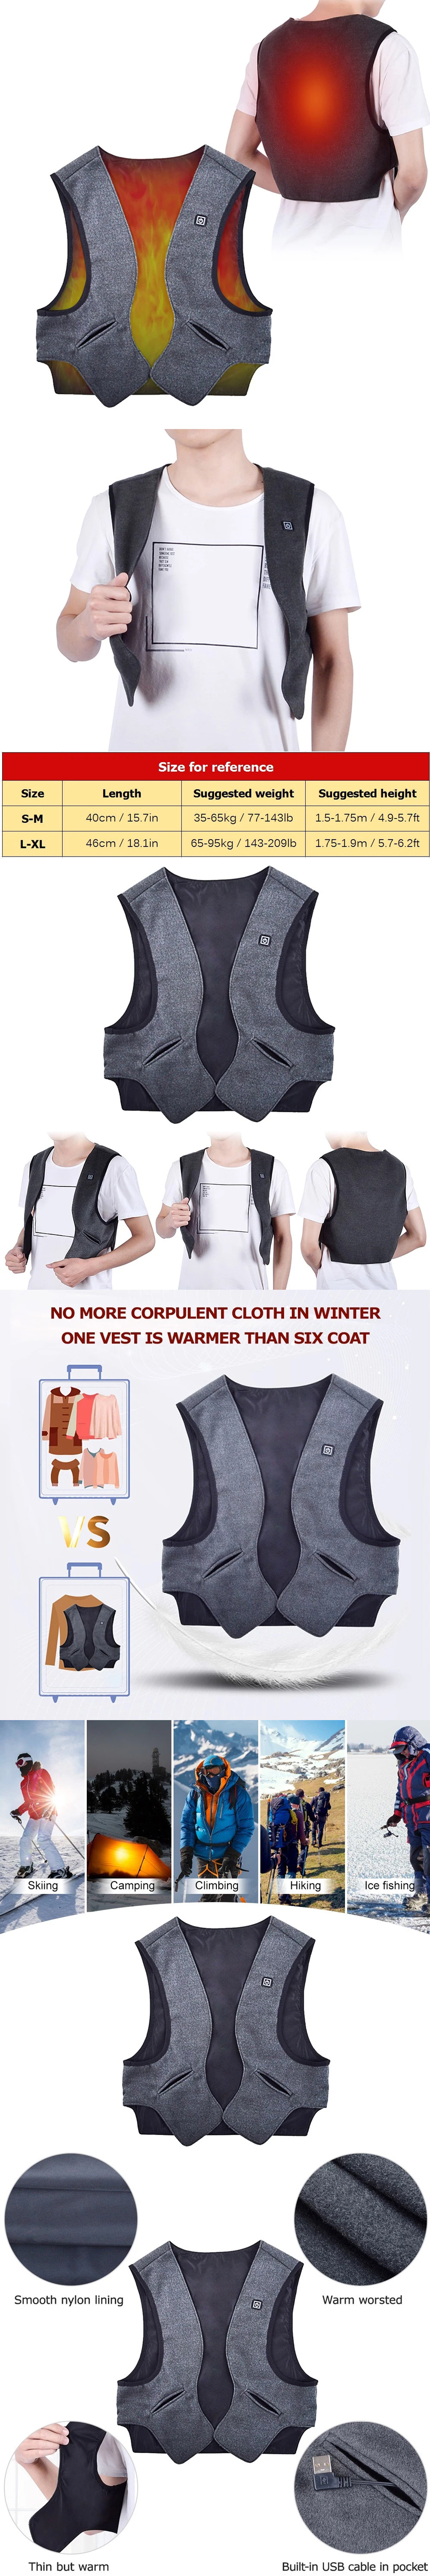 60degC-Electric-Heated-Warm-Waistcoat-3-levels-Quick-Heating-Washable-Far-Infrared-Heating-Vest-Outd-1911184-1